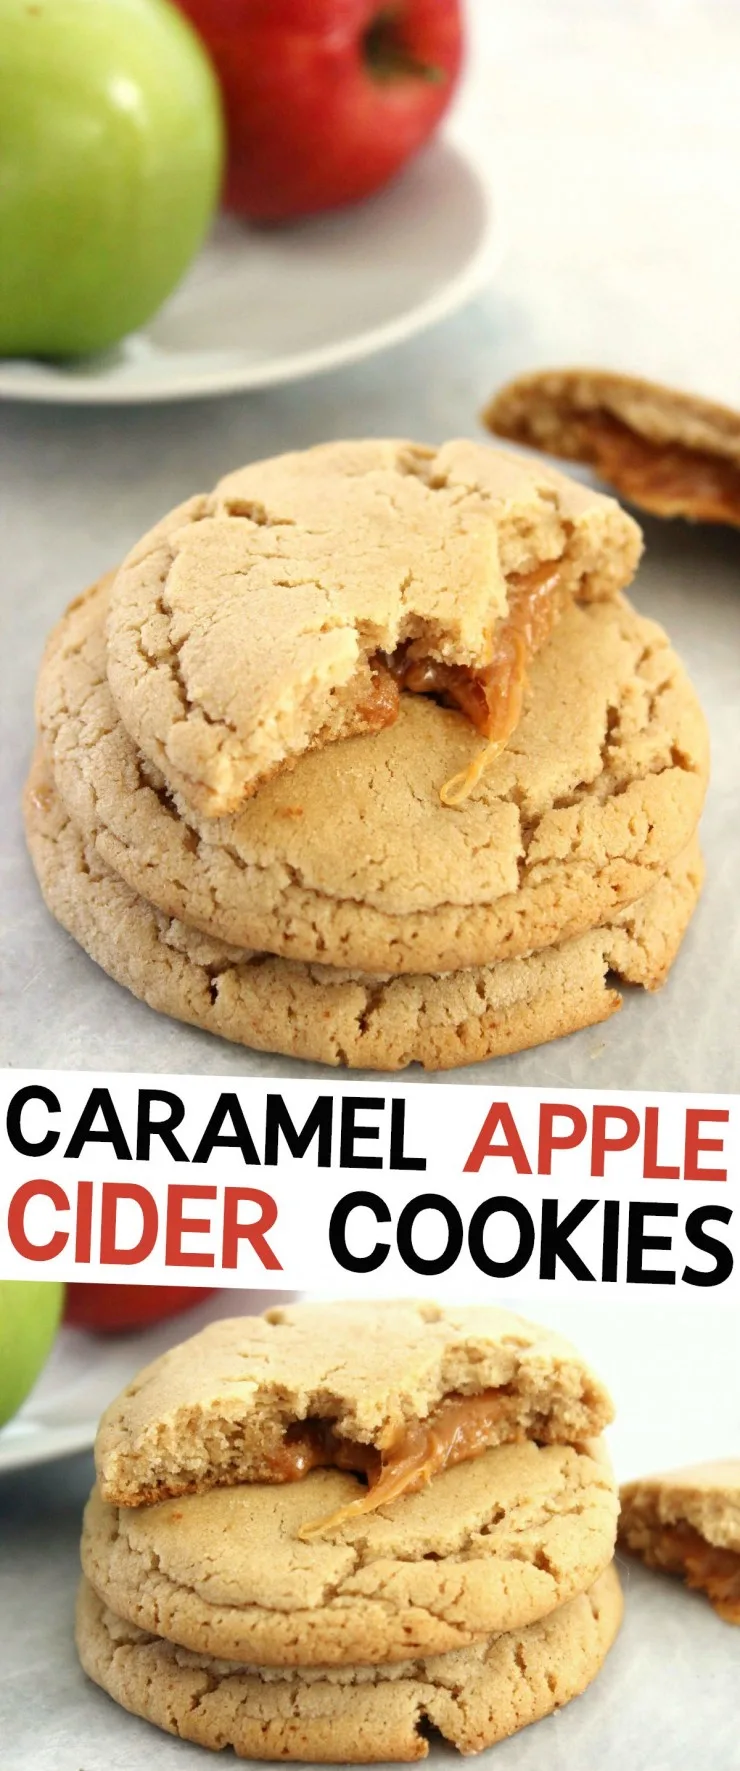 These Caramel Apple Cider Cookies feature an apple cider spiced cookie stuffed with ooey gooey caramel!